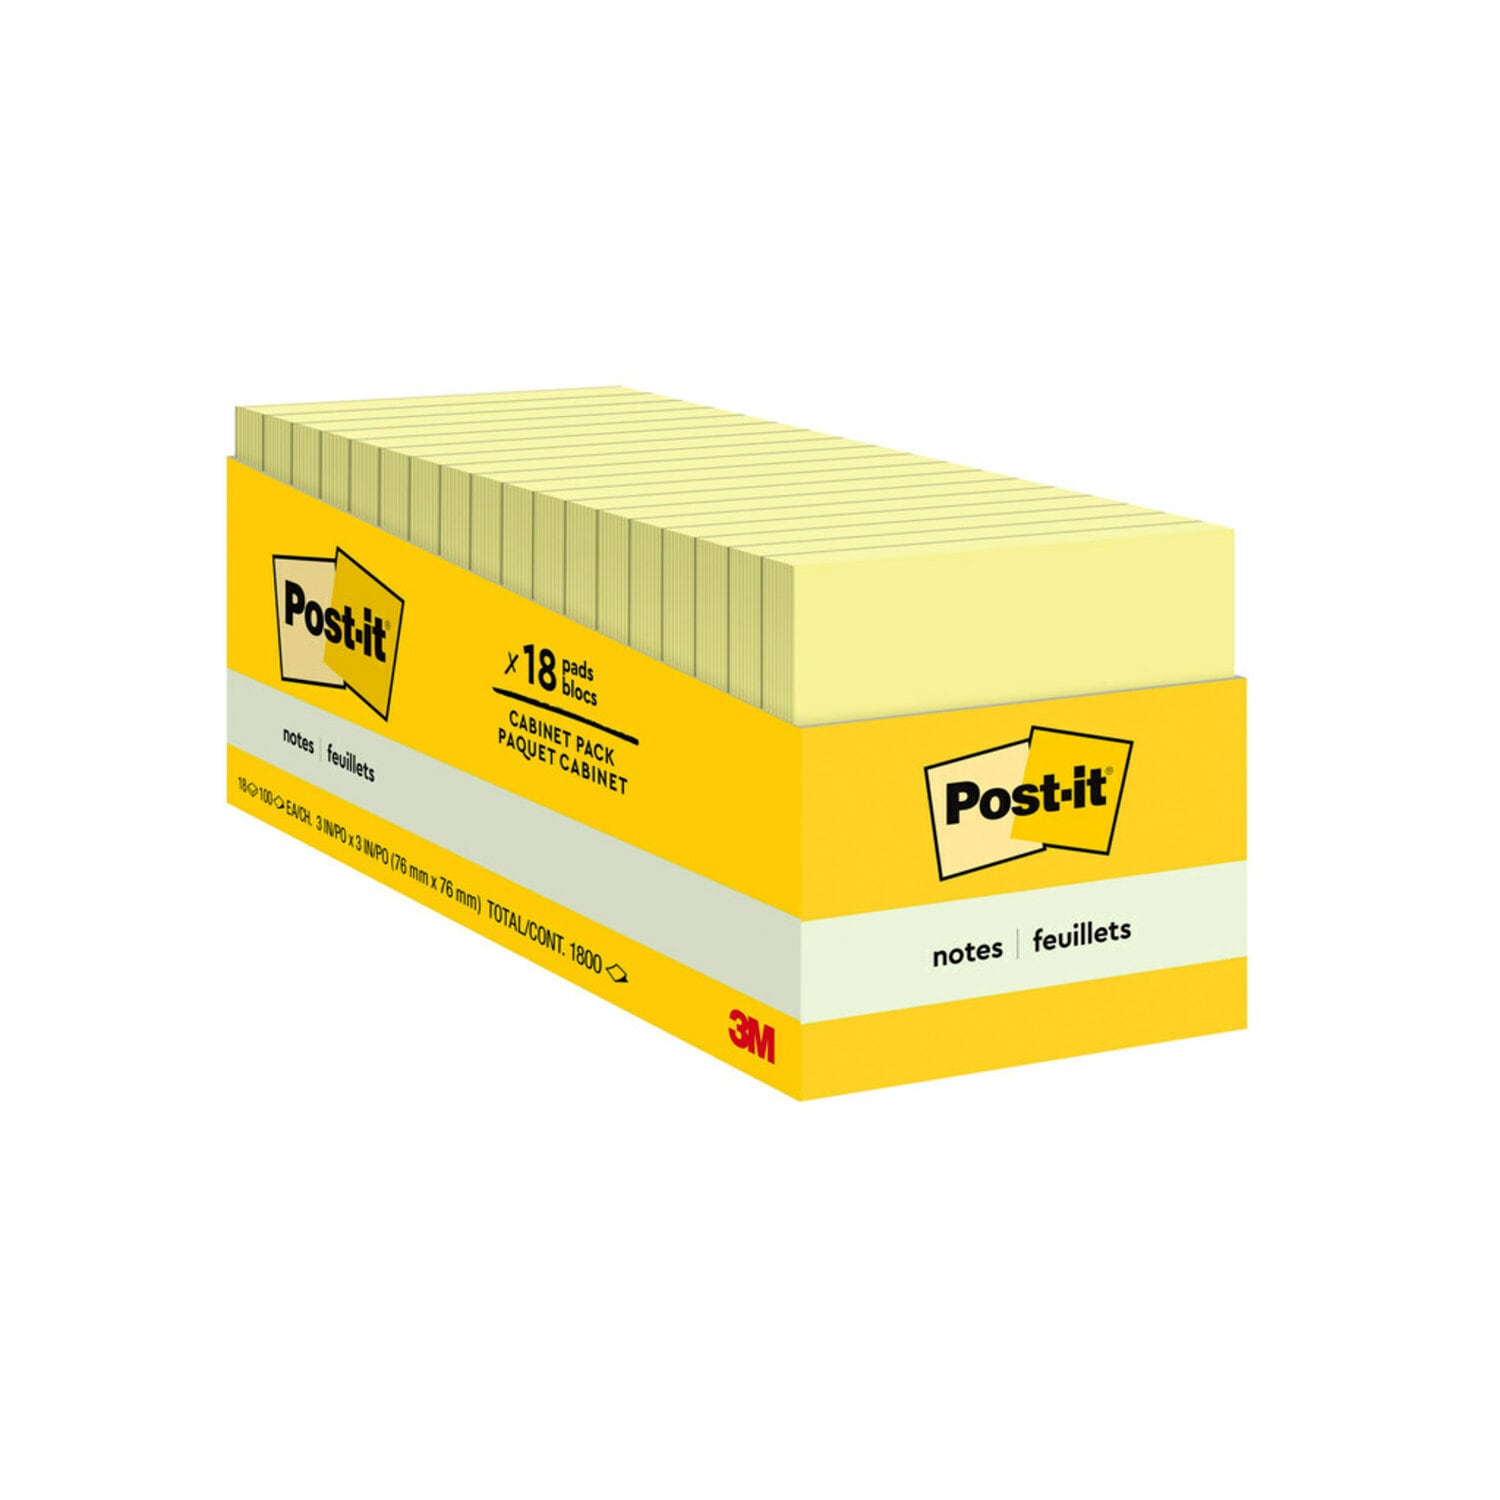 7010332634 - Post-it Notes 654-18CP, 3 in x 3 in (76 mm x 76 mm)